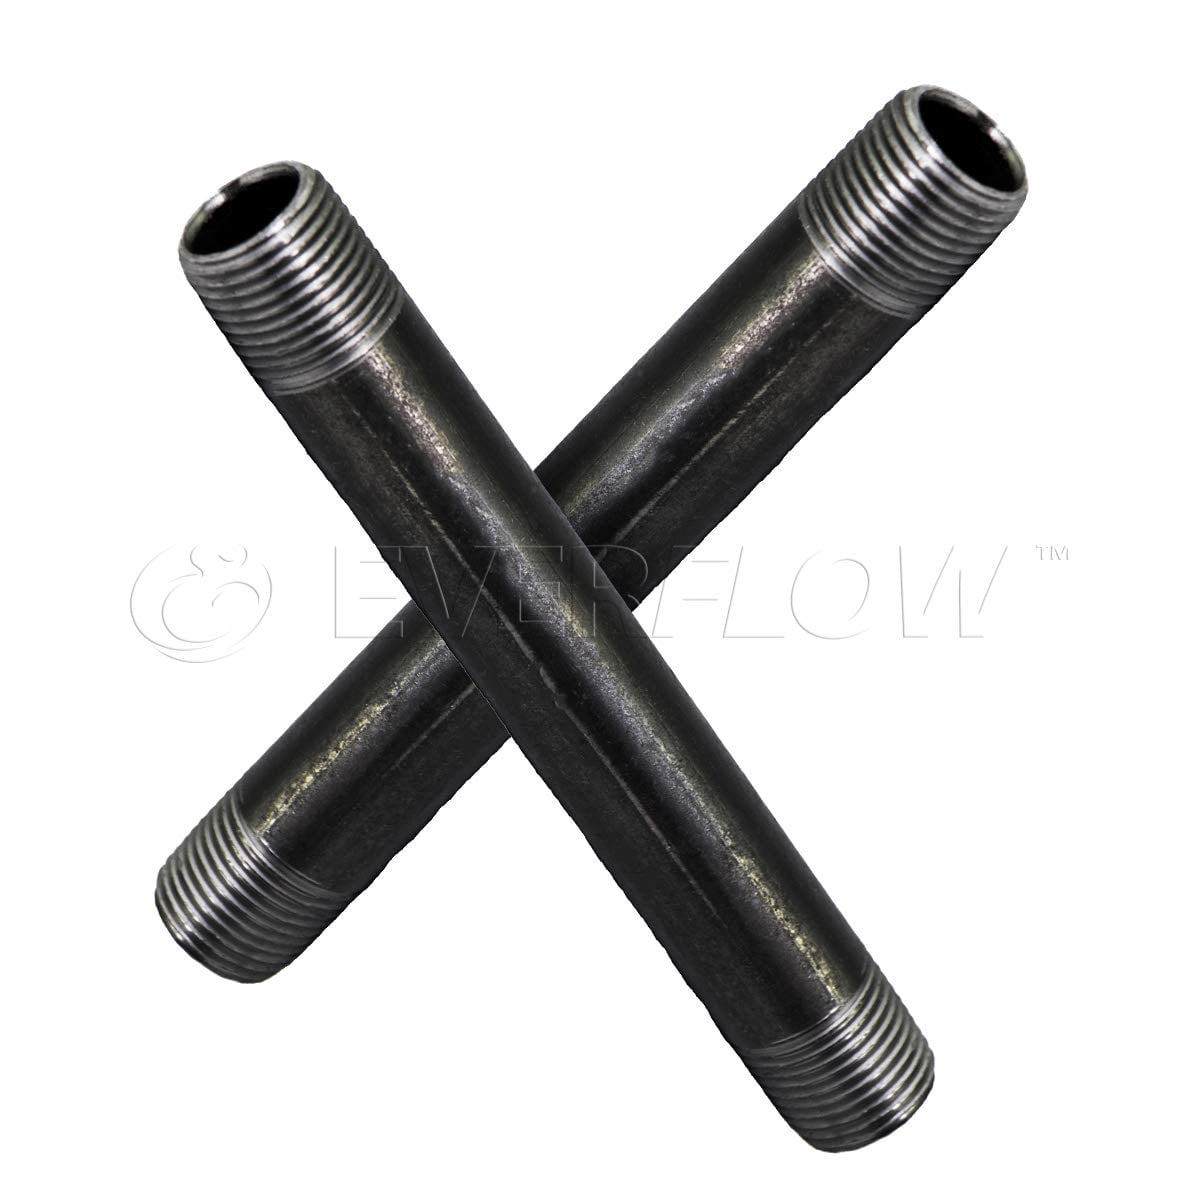 Threaded Pre Cut Pipe Connectors Details about   Black Steel Nipple 10 Pack/Short 1/2'' D. 